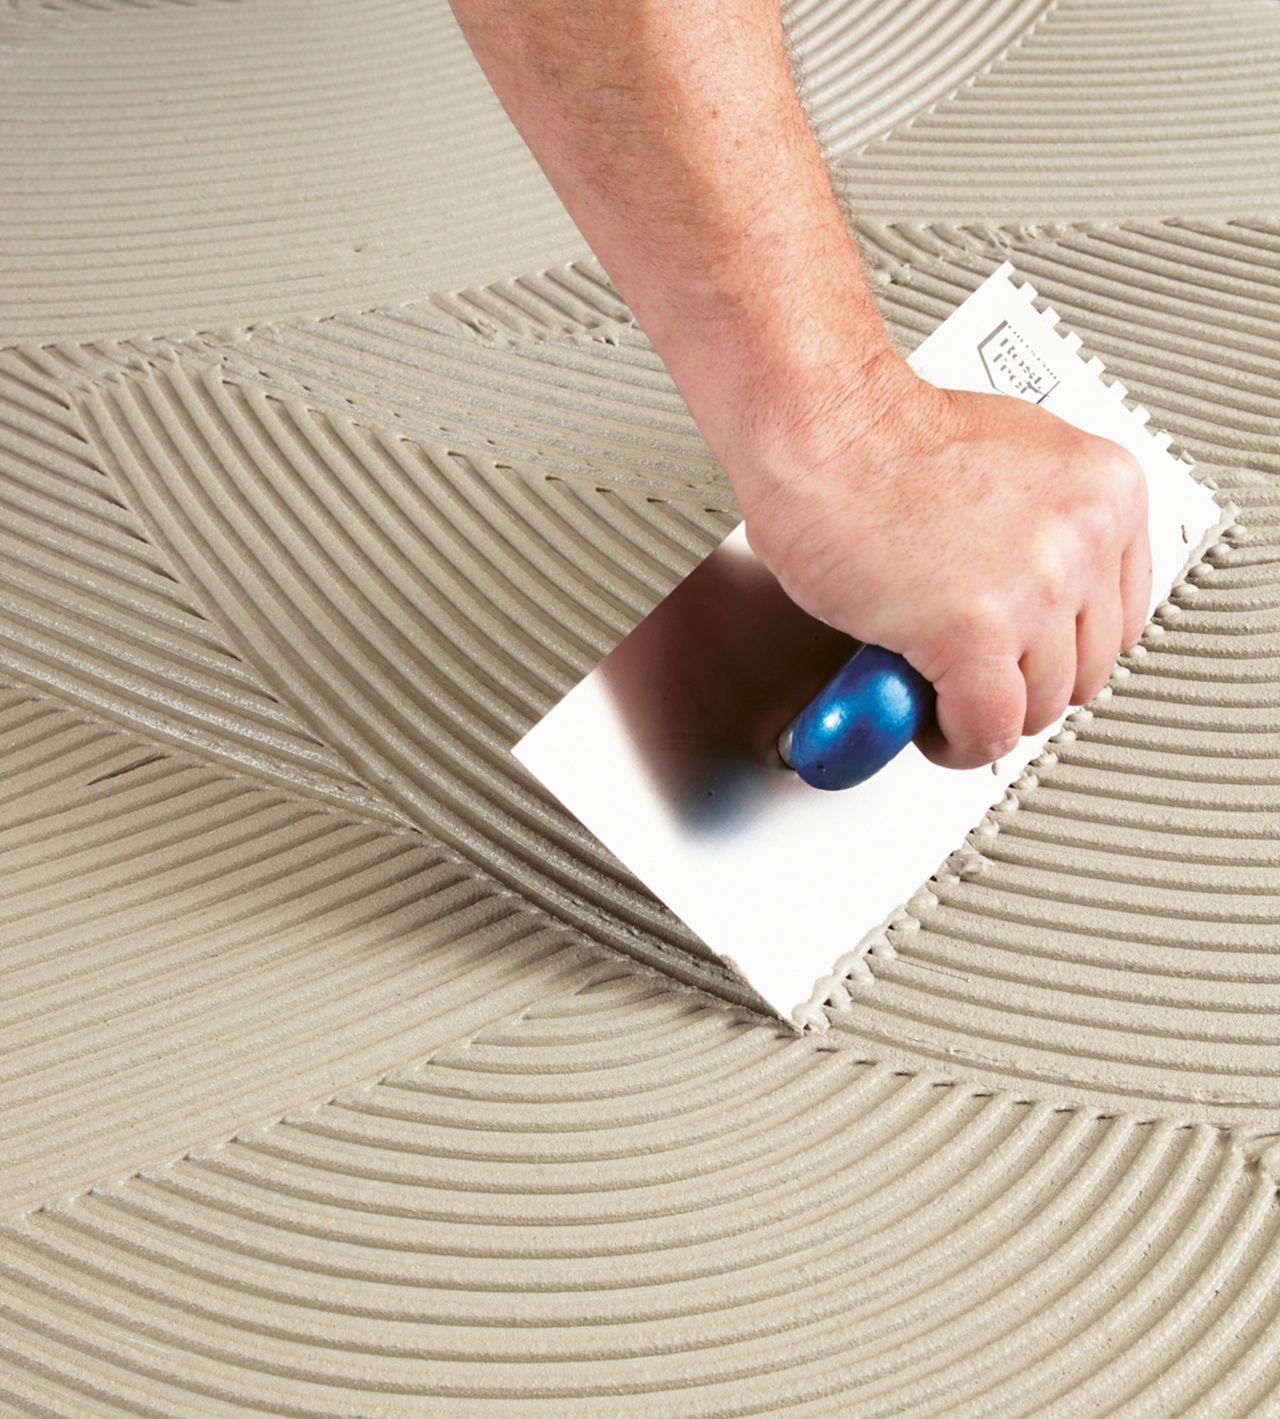 Application of tile adhesives